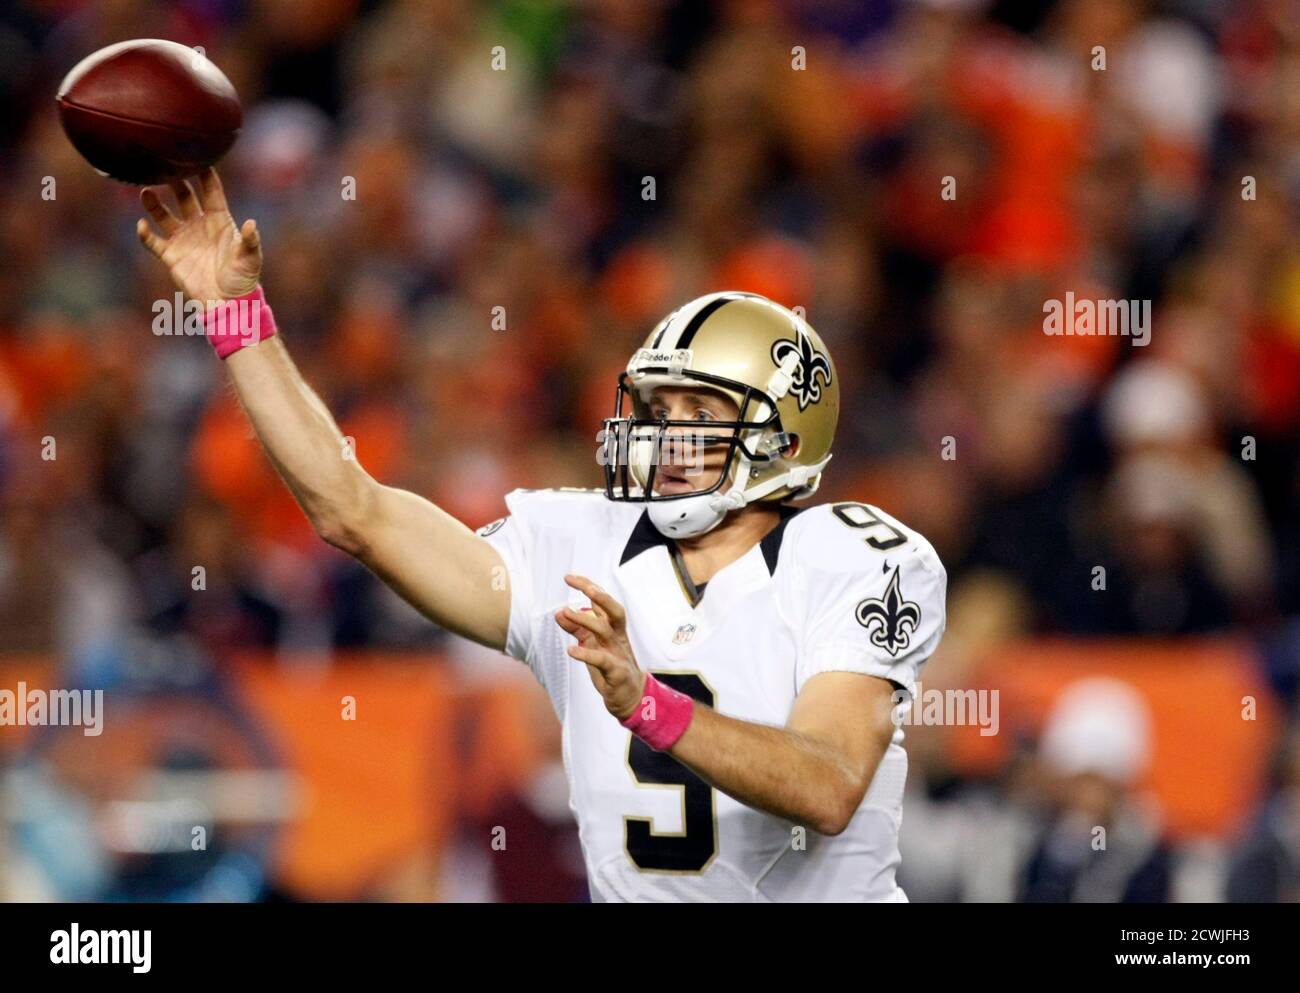 New Orleans Saints quarterback Drew Brees throws against the Denver Broncos in the first quarter of their NFL football game in Denver October 28, 2012.  REUTERS/Rick Wilking (UNITED STATES - Tags: SPORT FOOTBALL) Stock Photo